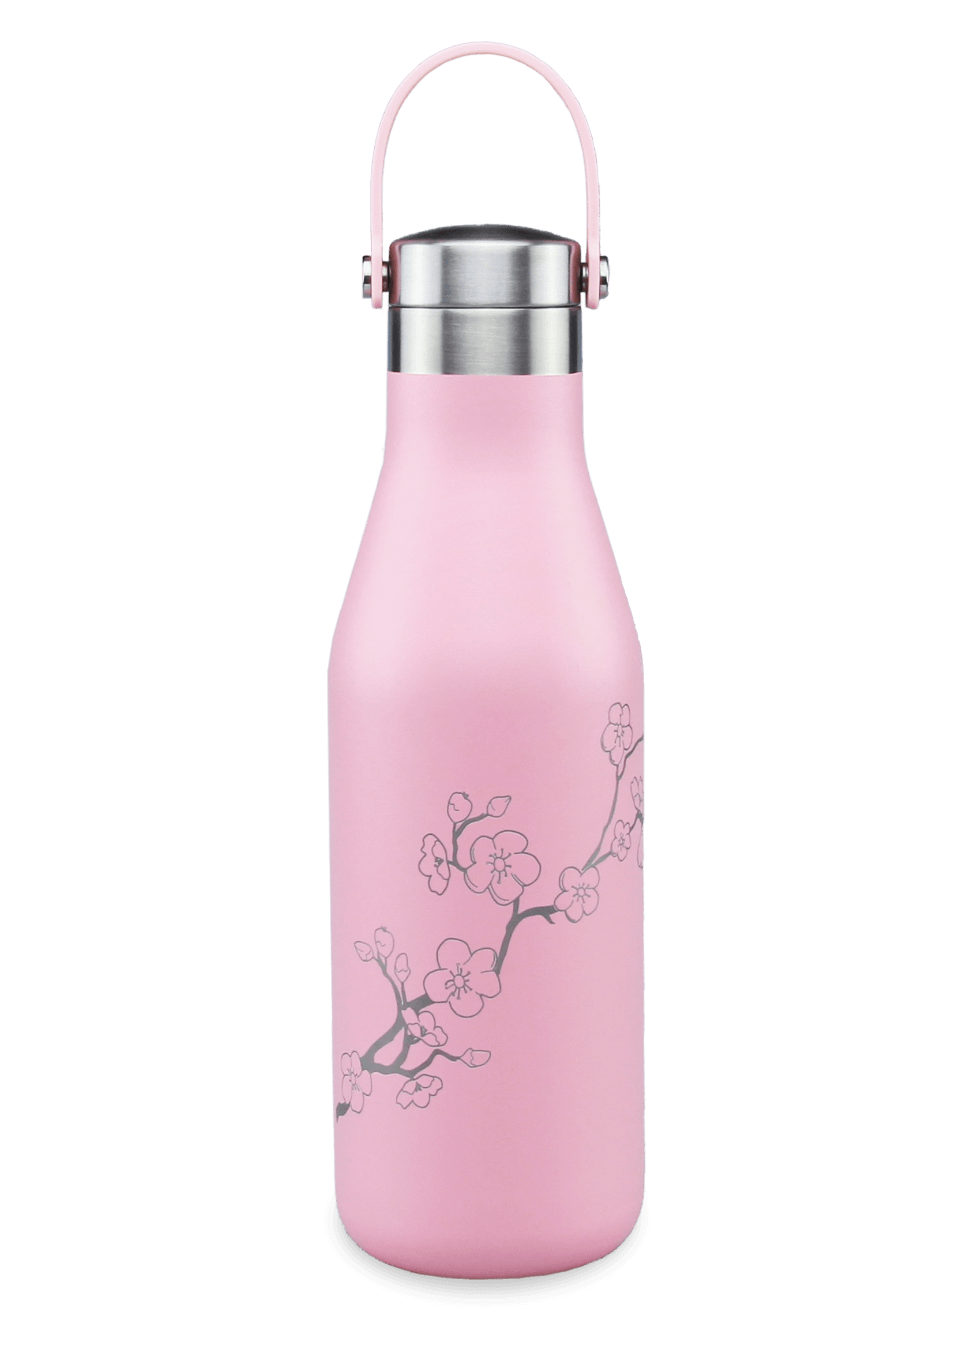 refillable thermos water bottle with carry strap pink with laser etched cherry blossom